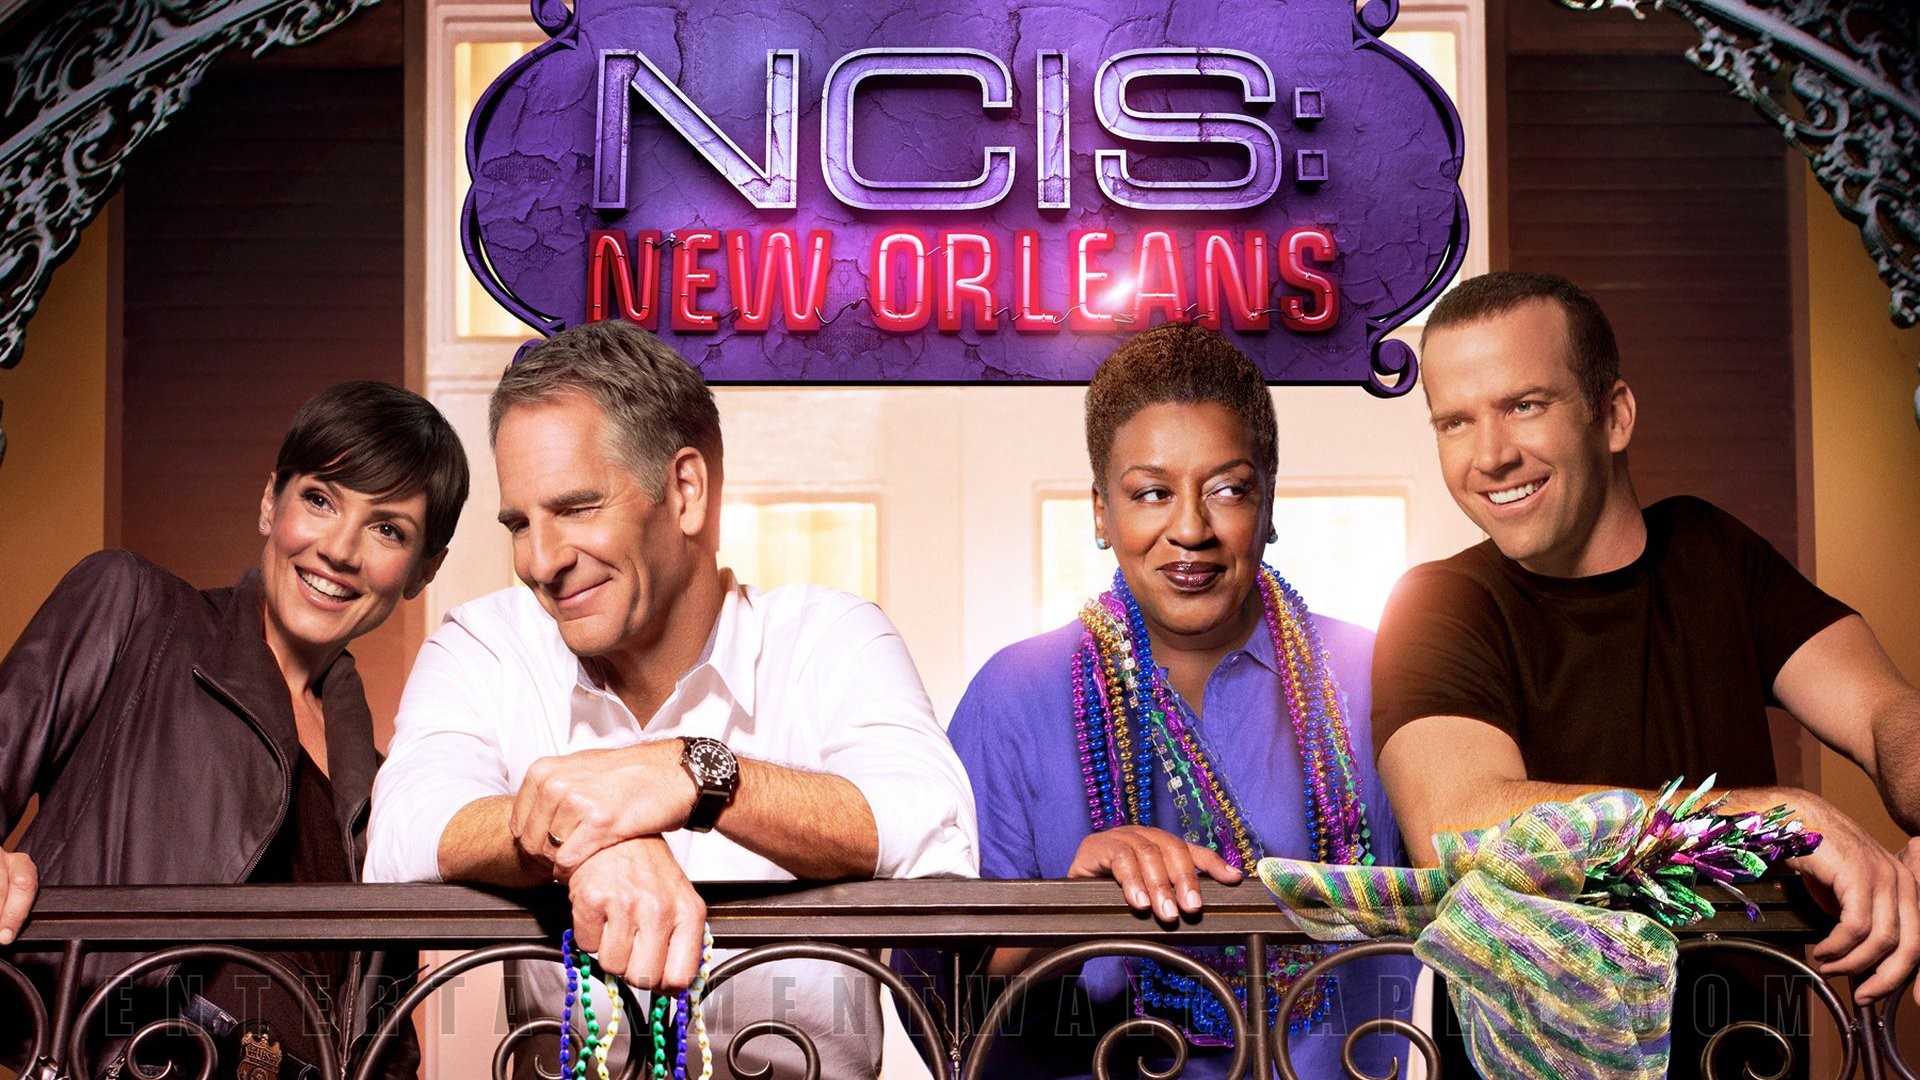 1920x1080 ... ncis new orleans wallpapers high quality download free ...